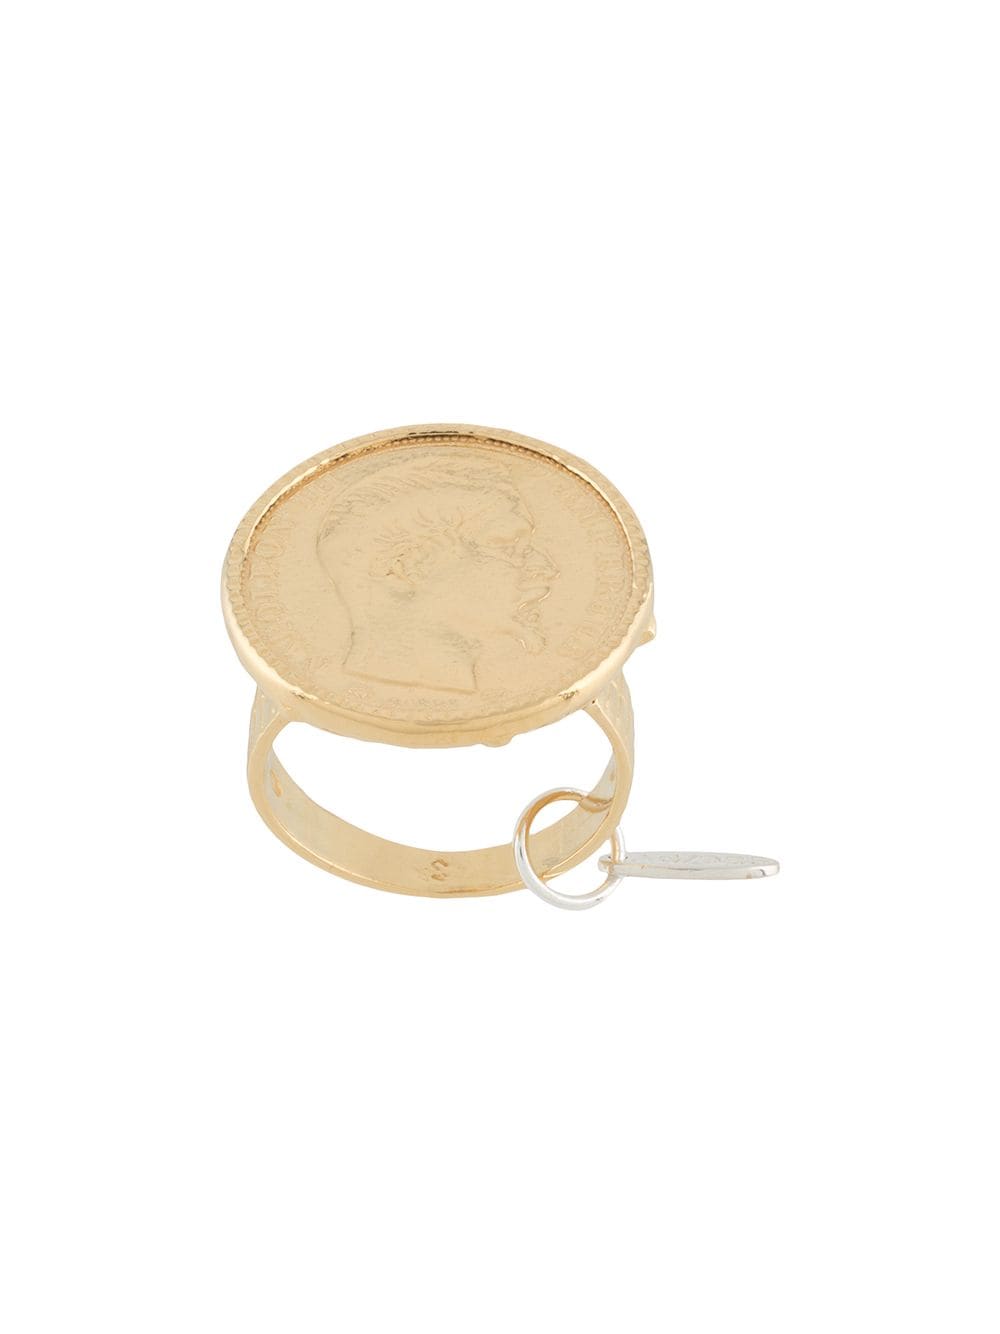 Wouters & Hendrix Sins And Senses coin-detail ring - Gold von Wouters & Hendrix